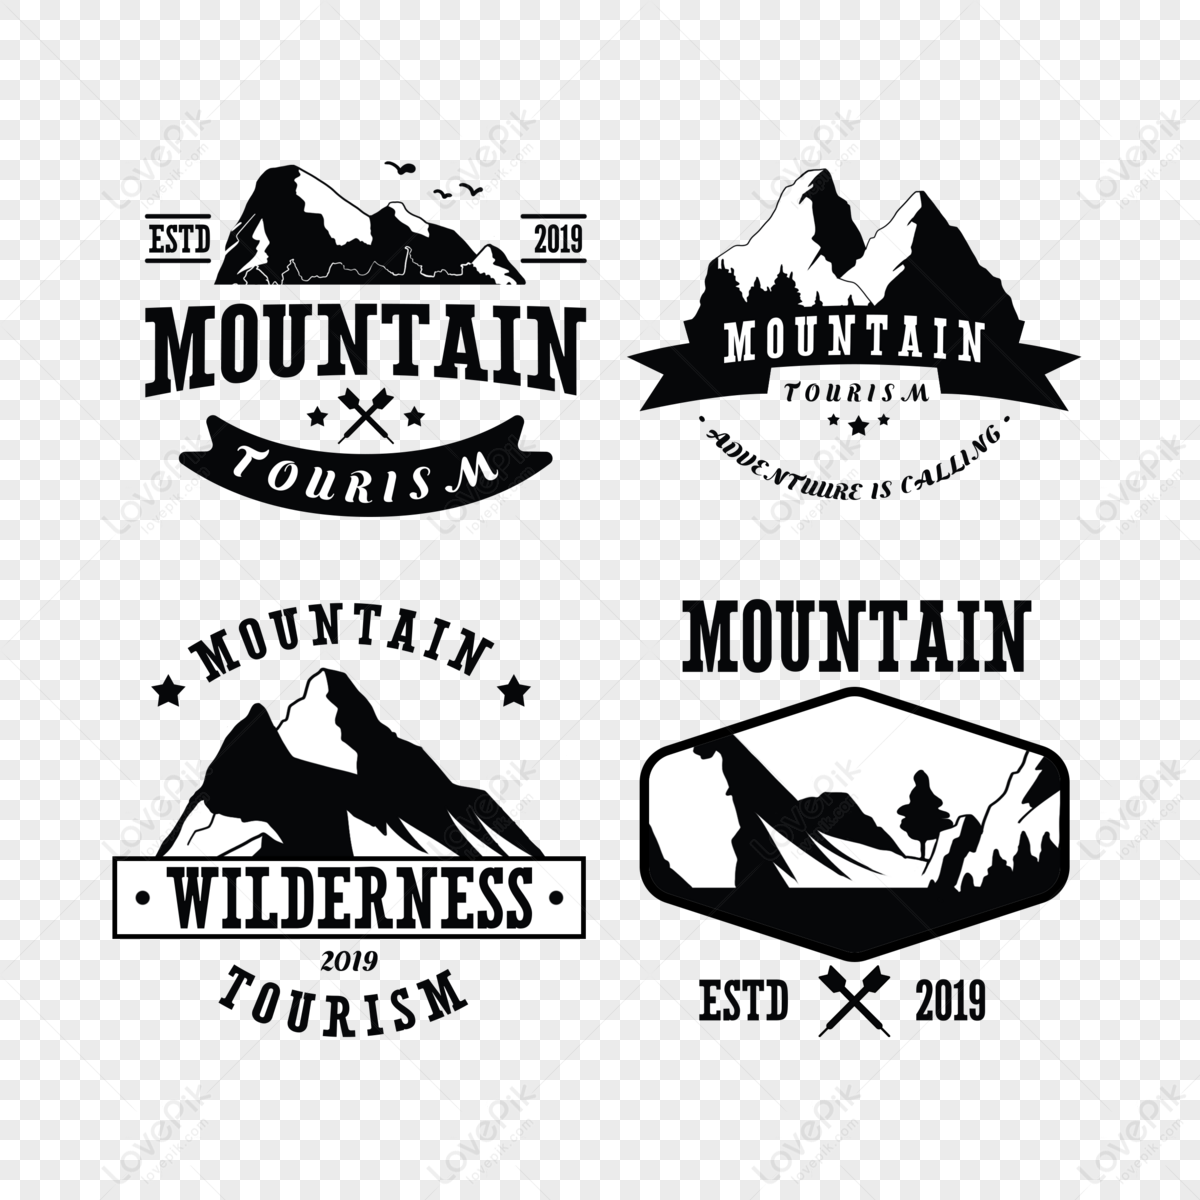 Black mountaineering travel silhouette sign,nature,set,emblem png image free download